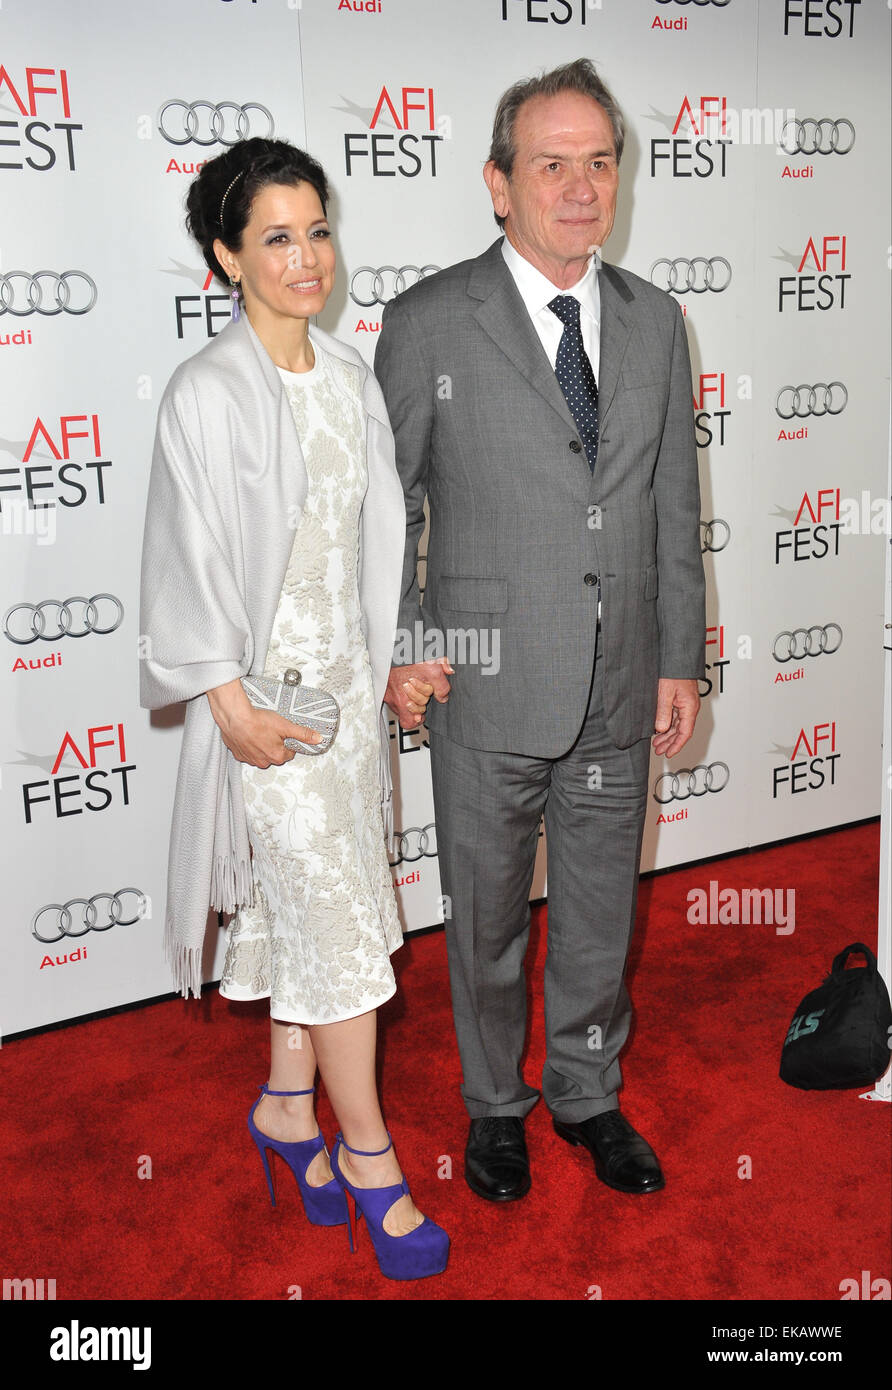 LOS ANGELES, CA - NOVEMBER 8, 2012: Tommy Lee Jones & wife Dawn Jones at the AFI Fest premiere of his movie 'Lincoln' at Grauman's Chinese Theatre, Hollywood. Stock Photo